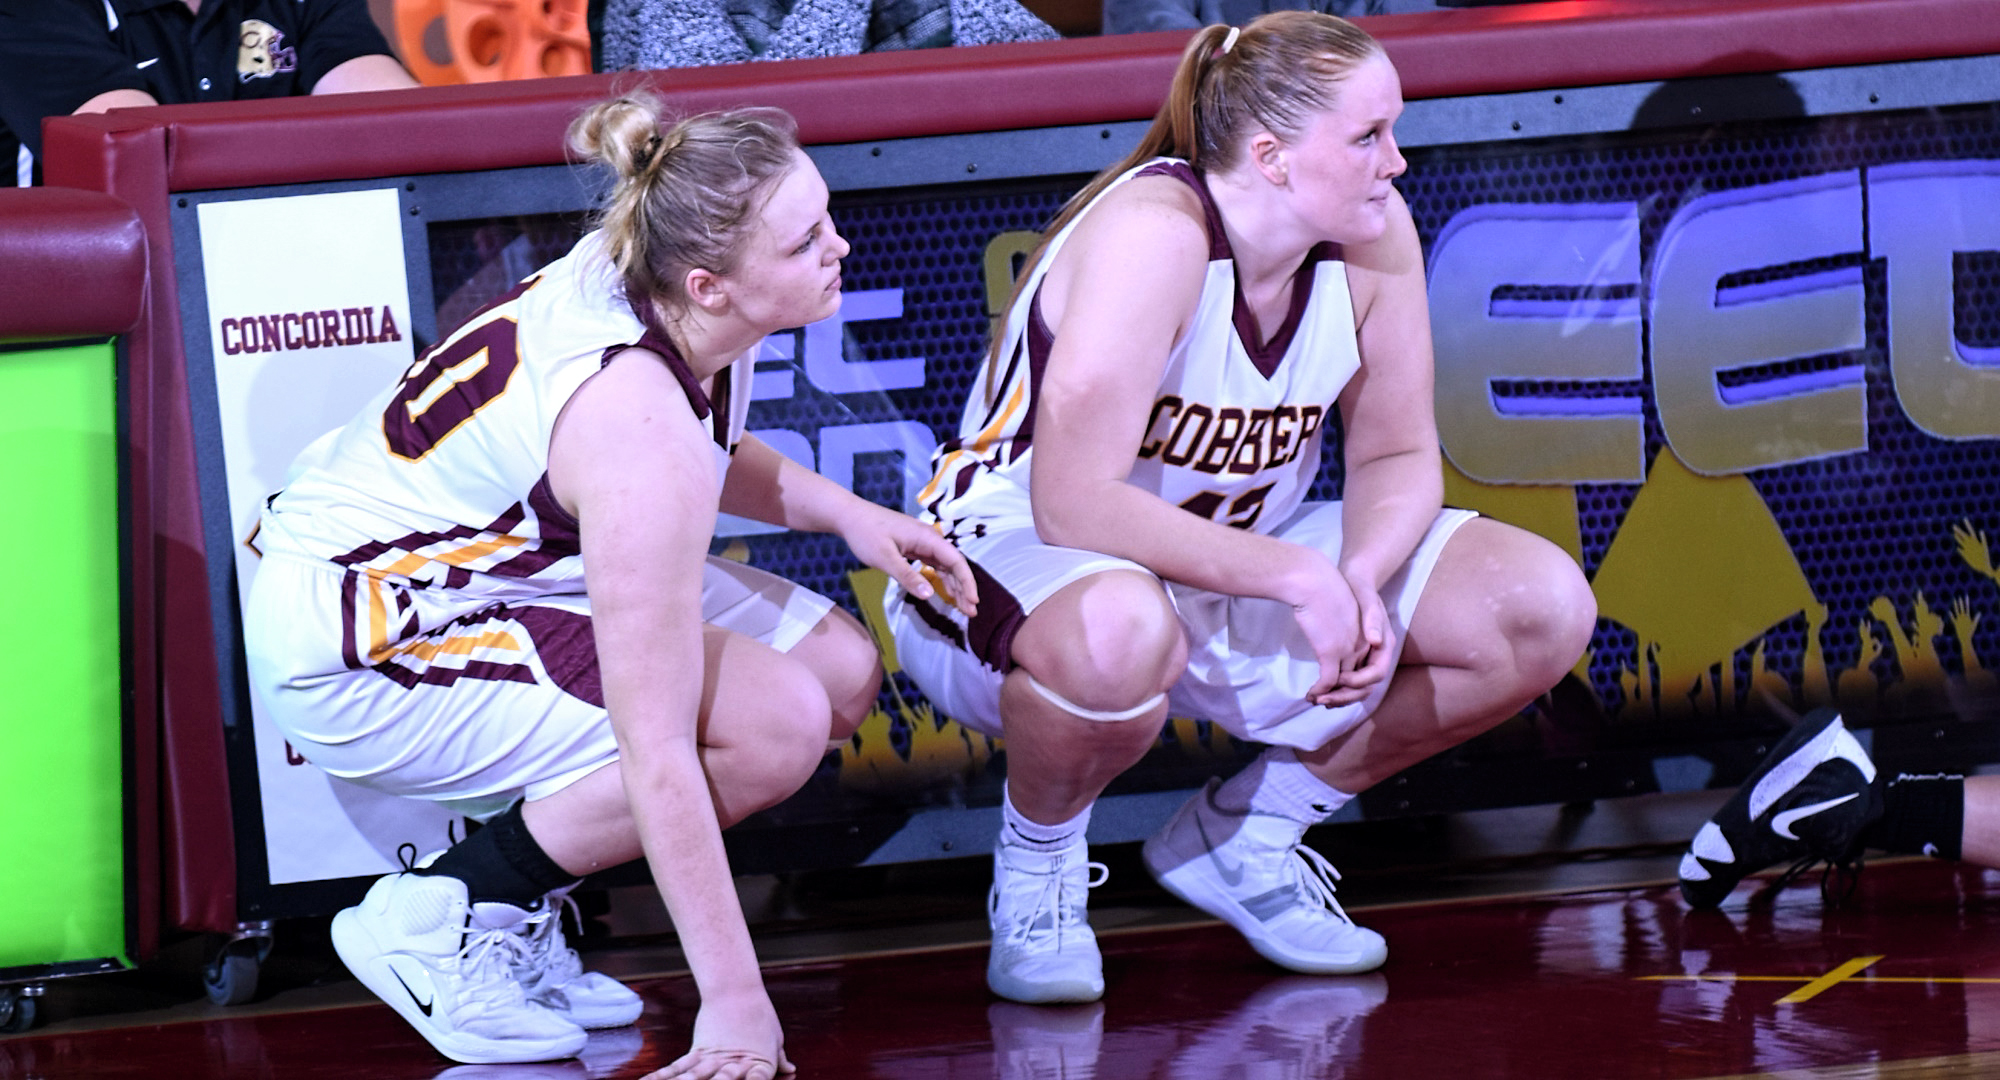 Kirstin Simmons (R) and Mira Ellefson combined for 25 points and helped the Cobbers outrebound Hamline 39-25 in their conference-opening win.